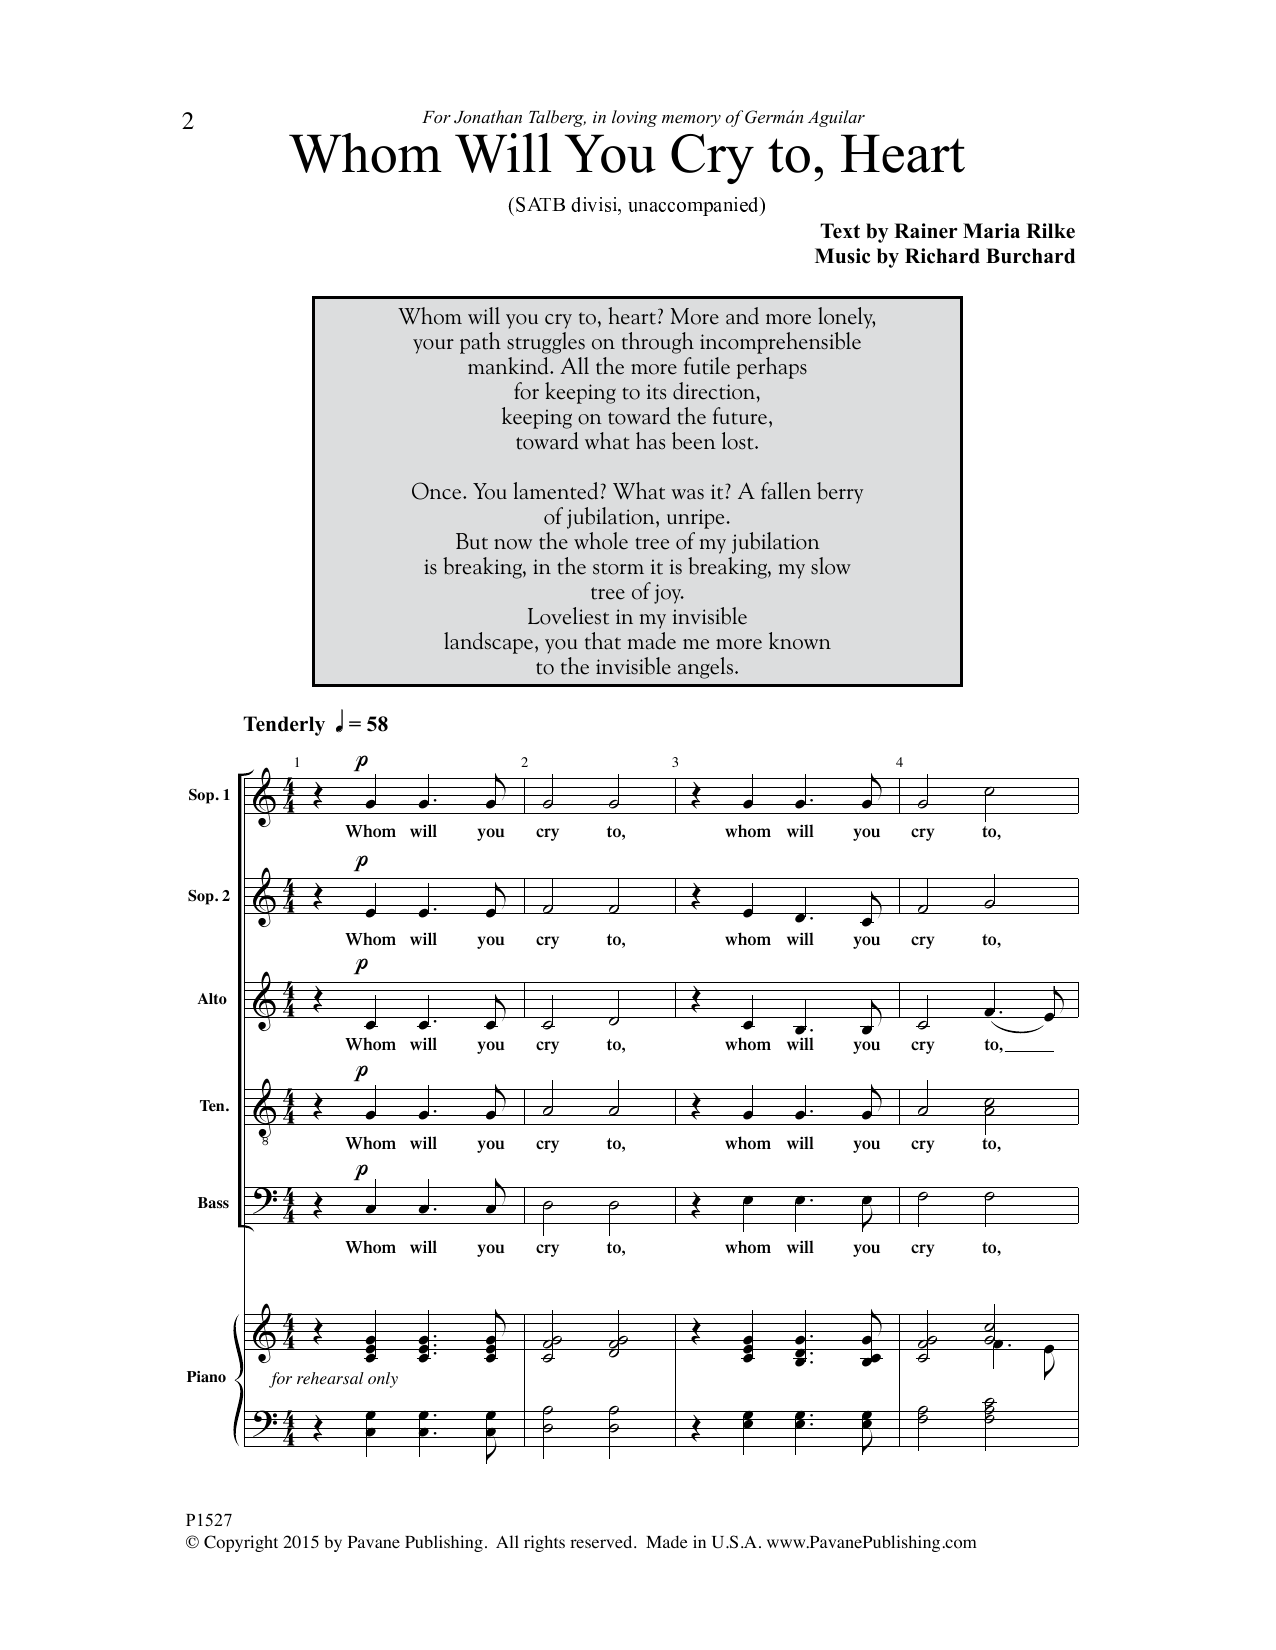 Download Richard Burchard Whom Will You Cry To, Heart? Sheet Music